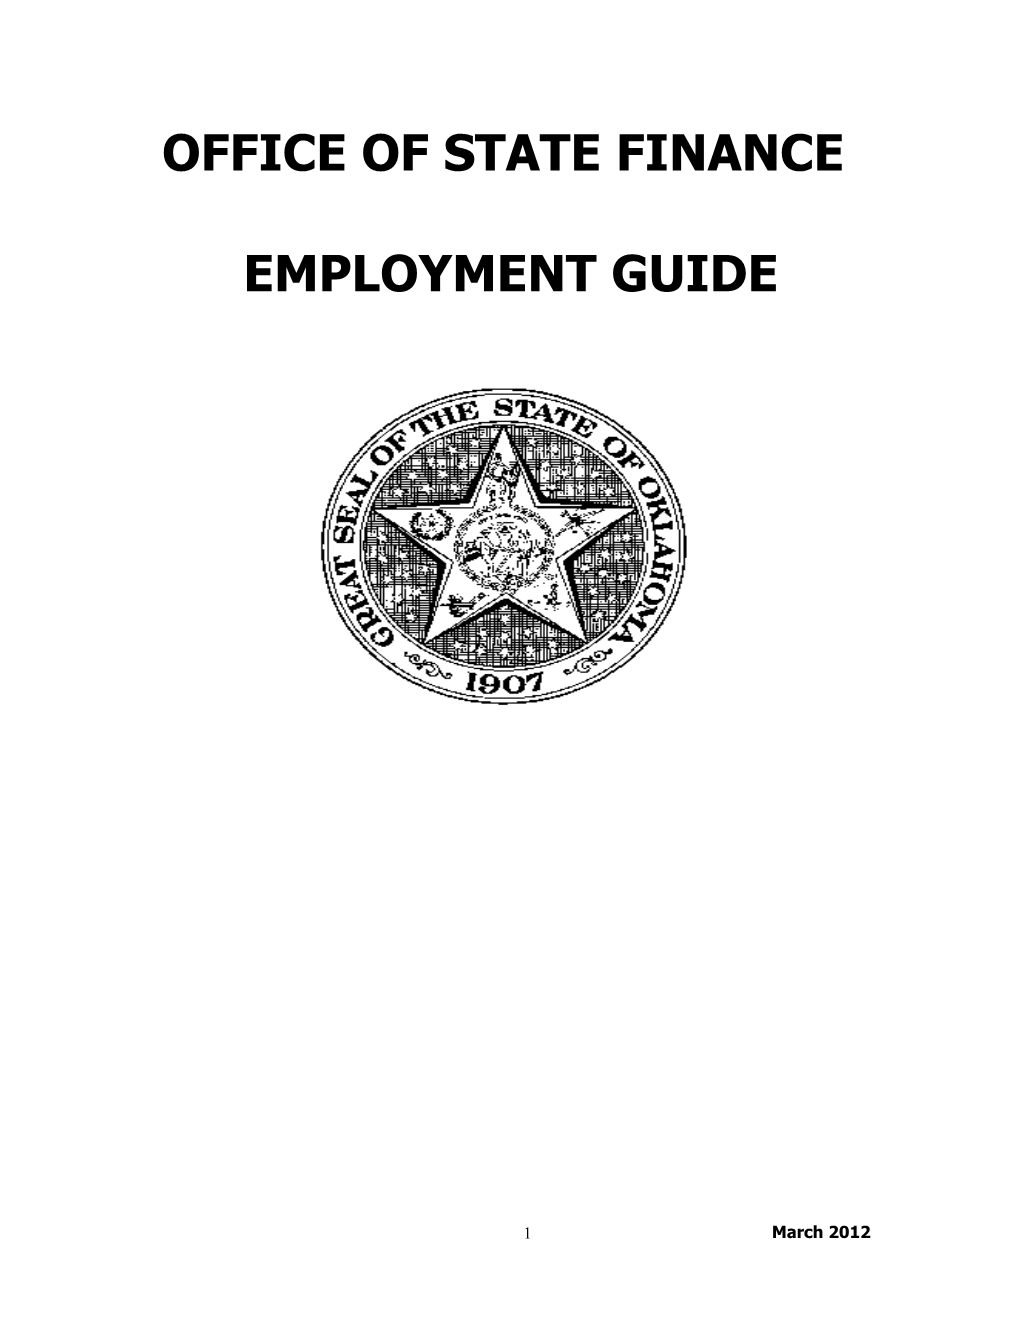 Office of State Finance Employment Guide